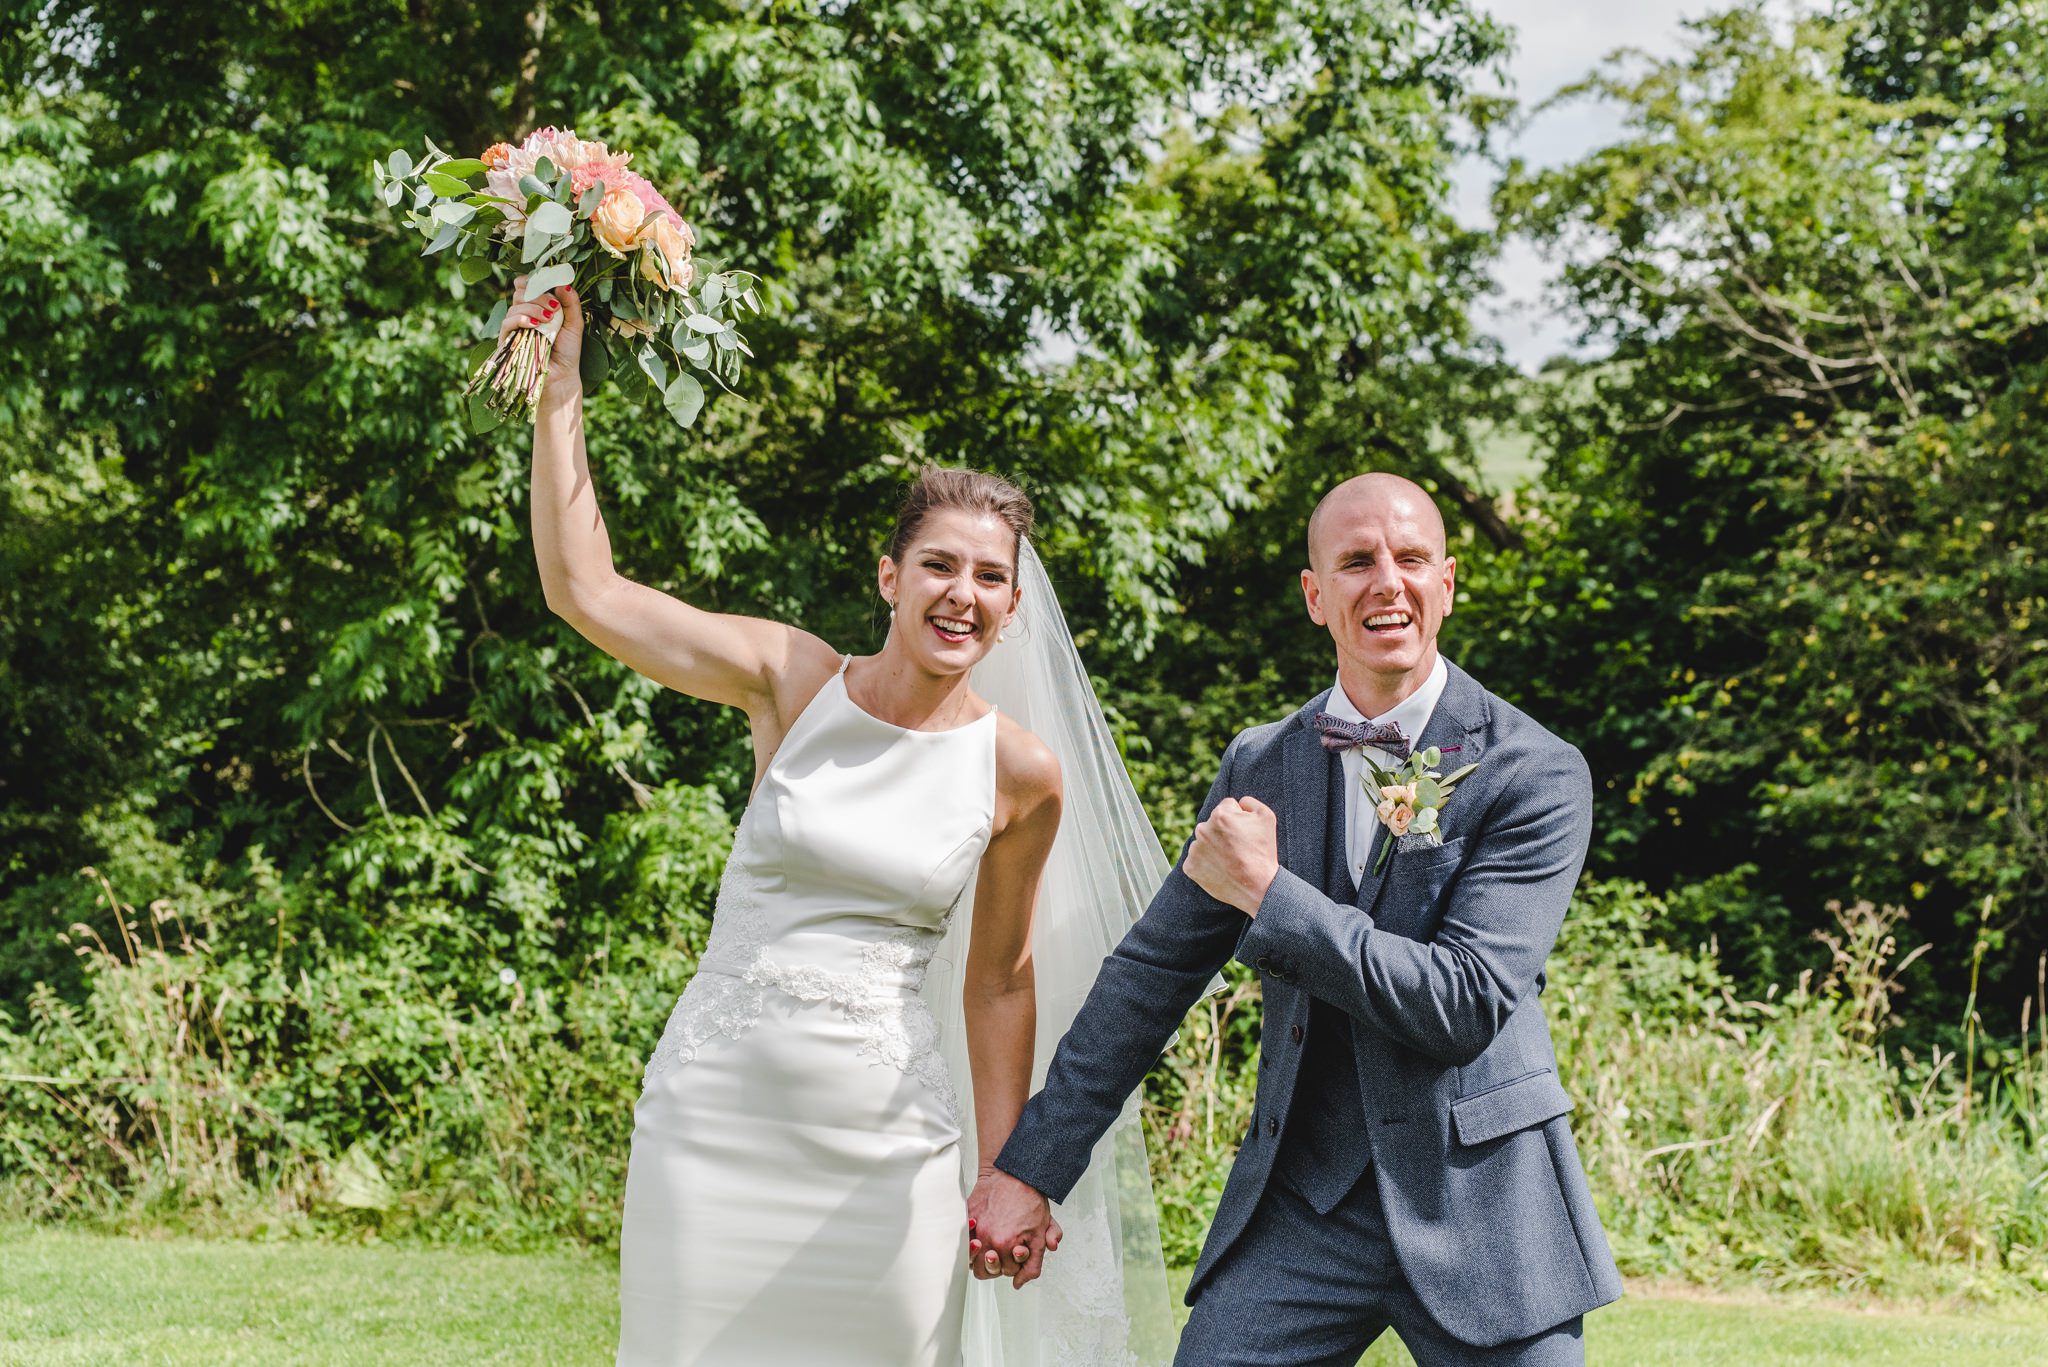 a bride and groom punching the air in celebration